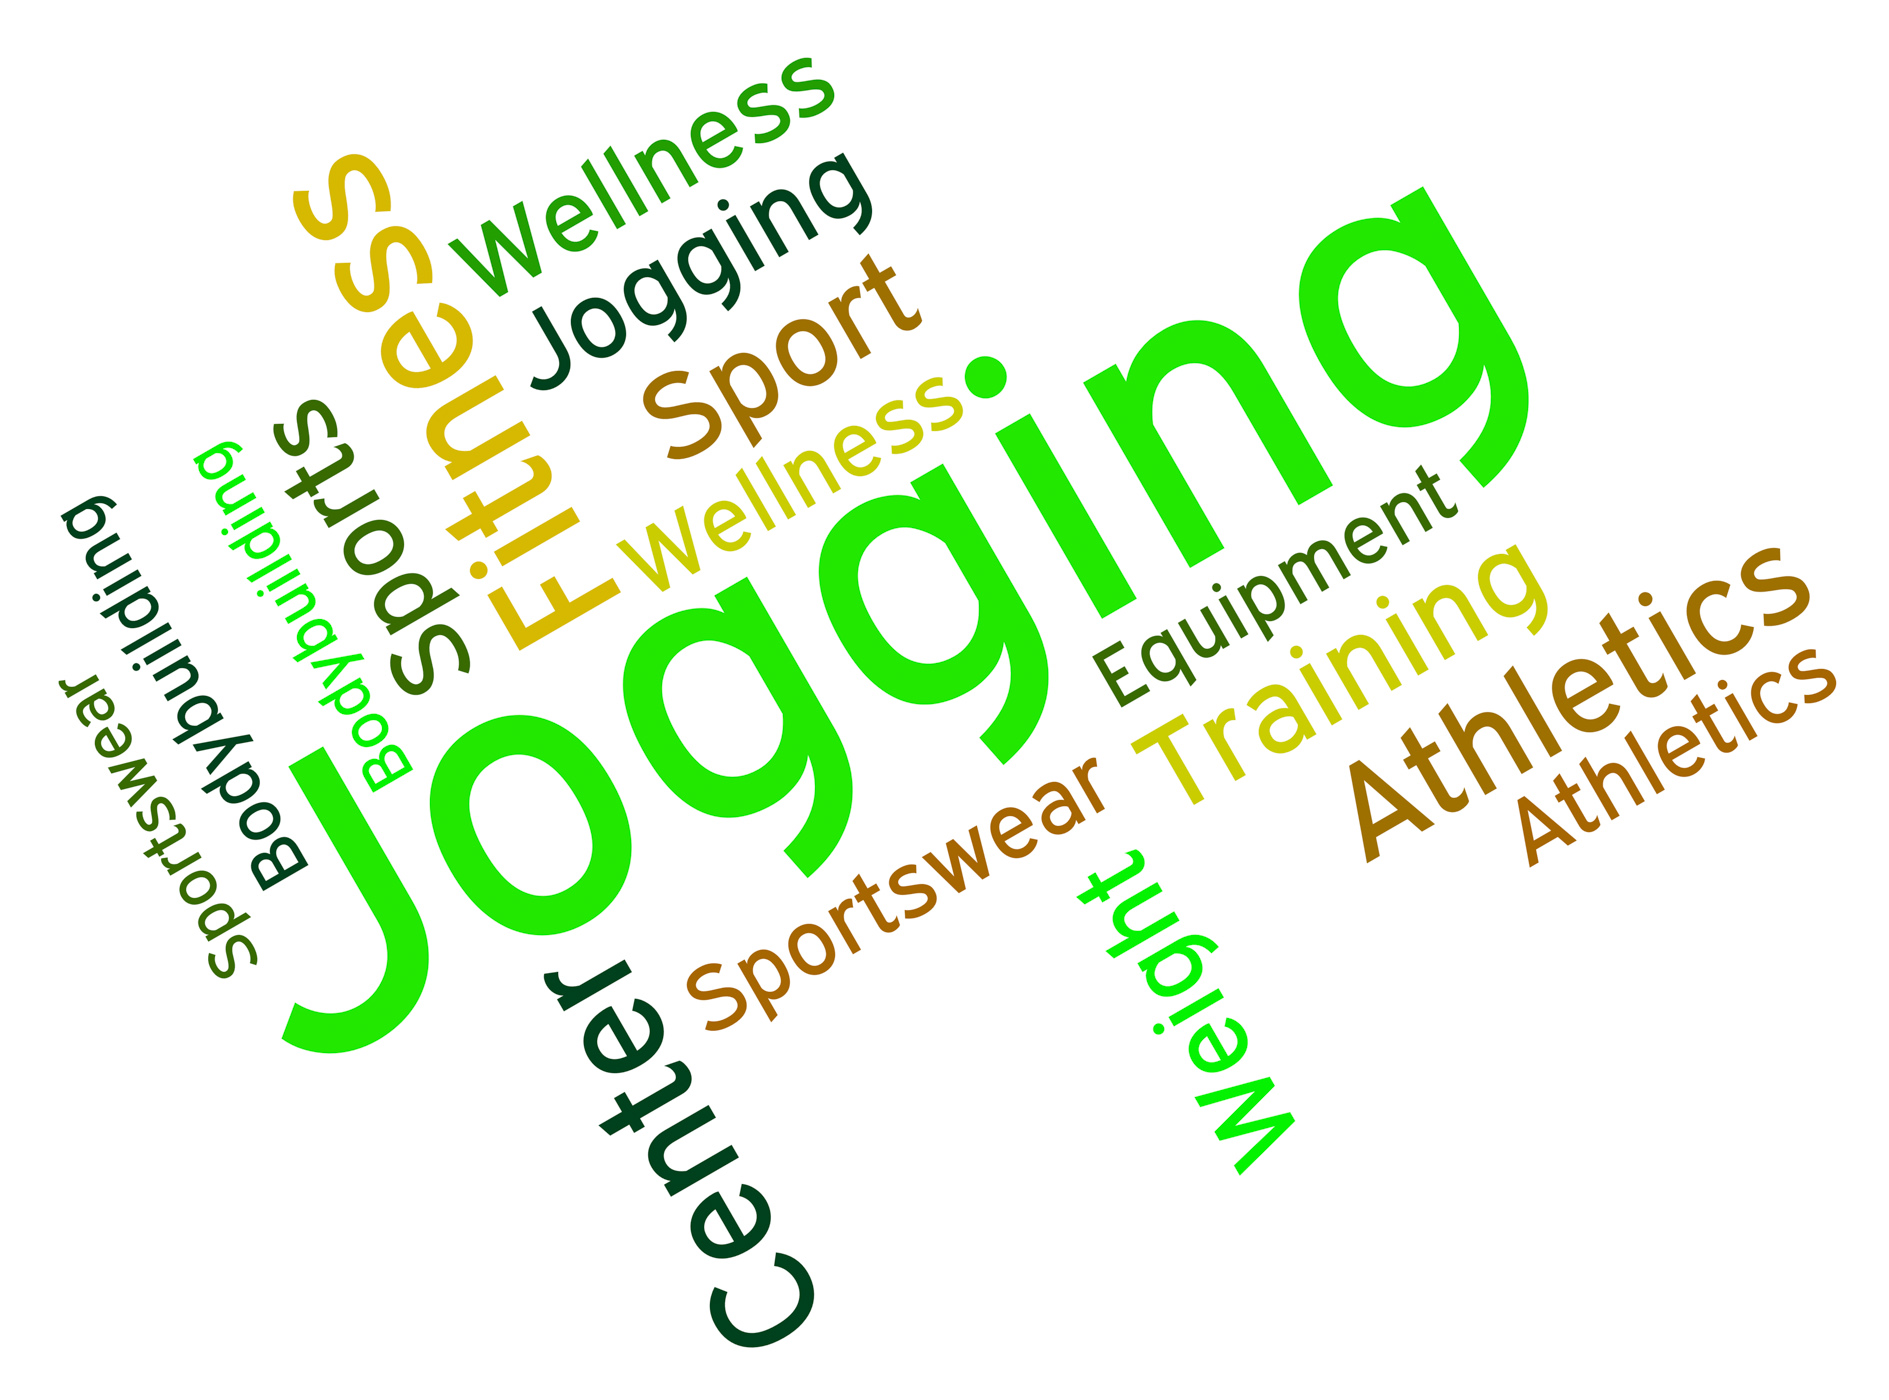 Jogging word shows exercise workout and health photo